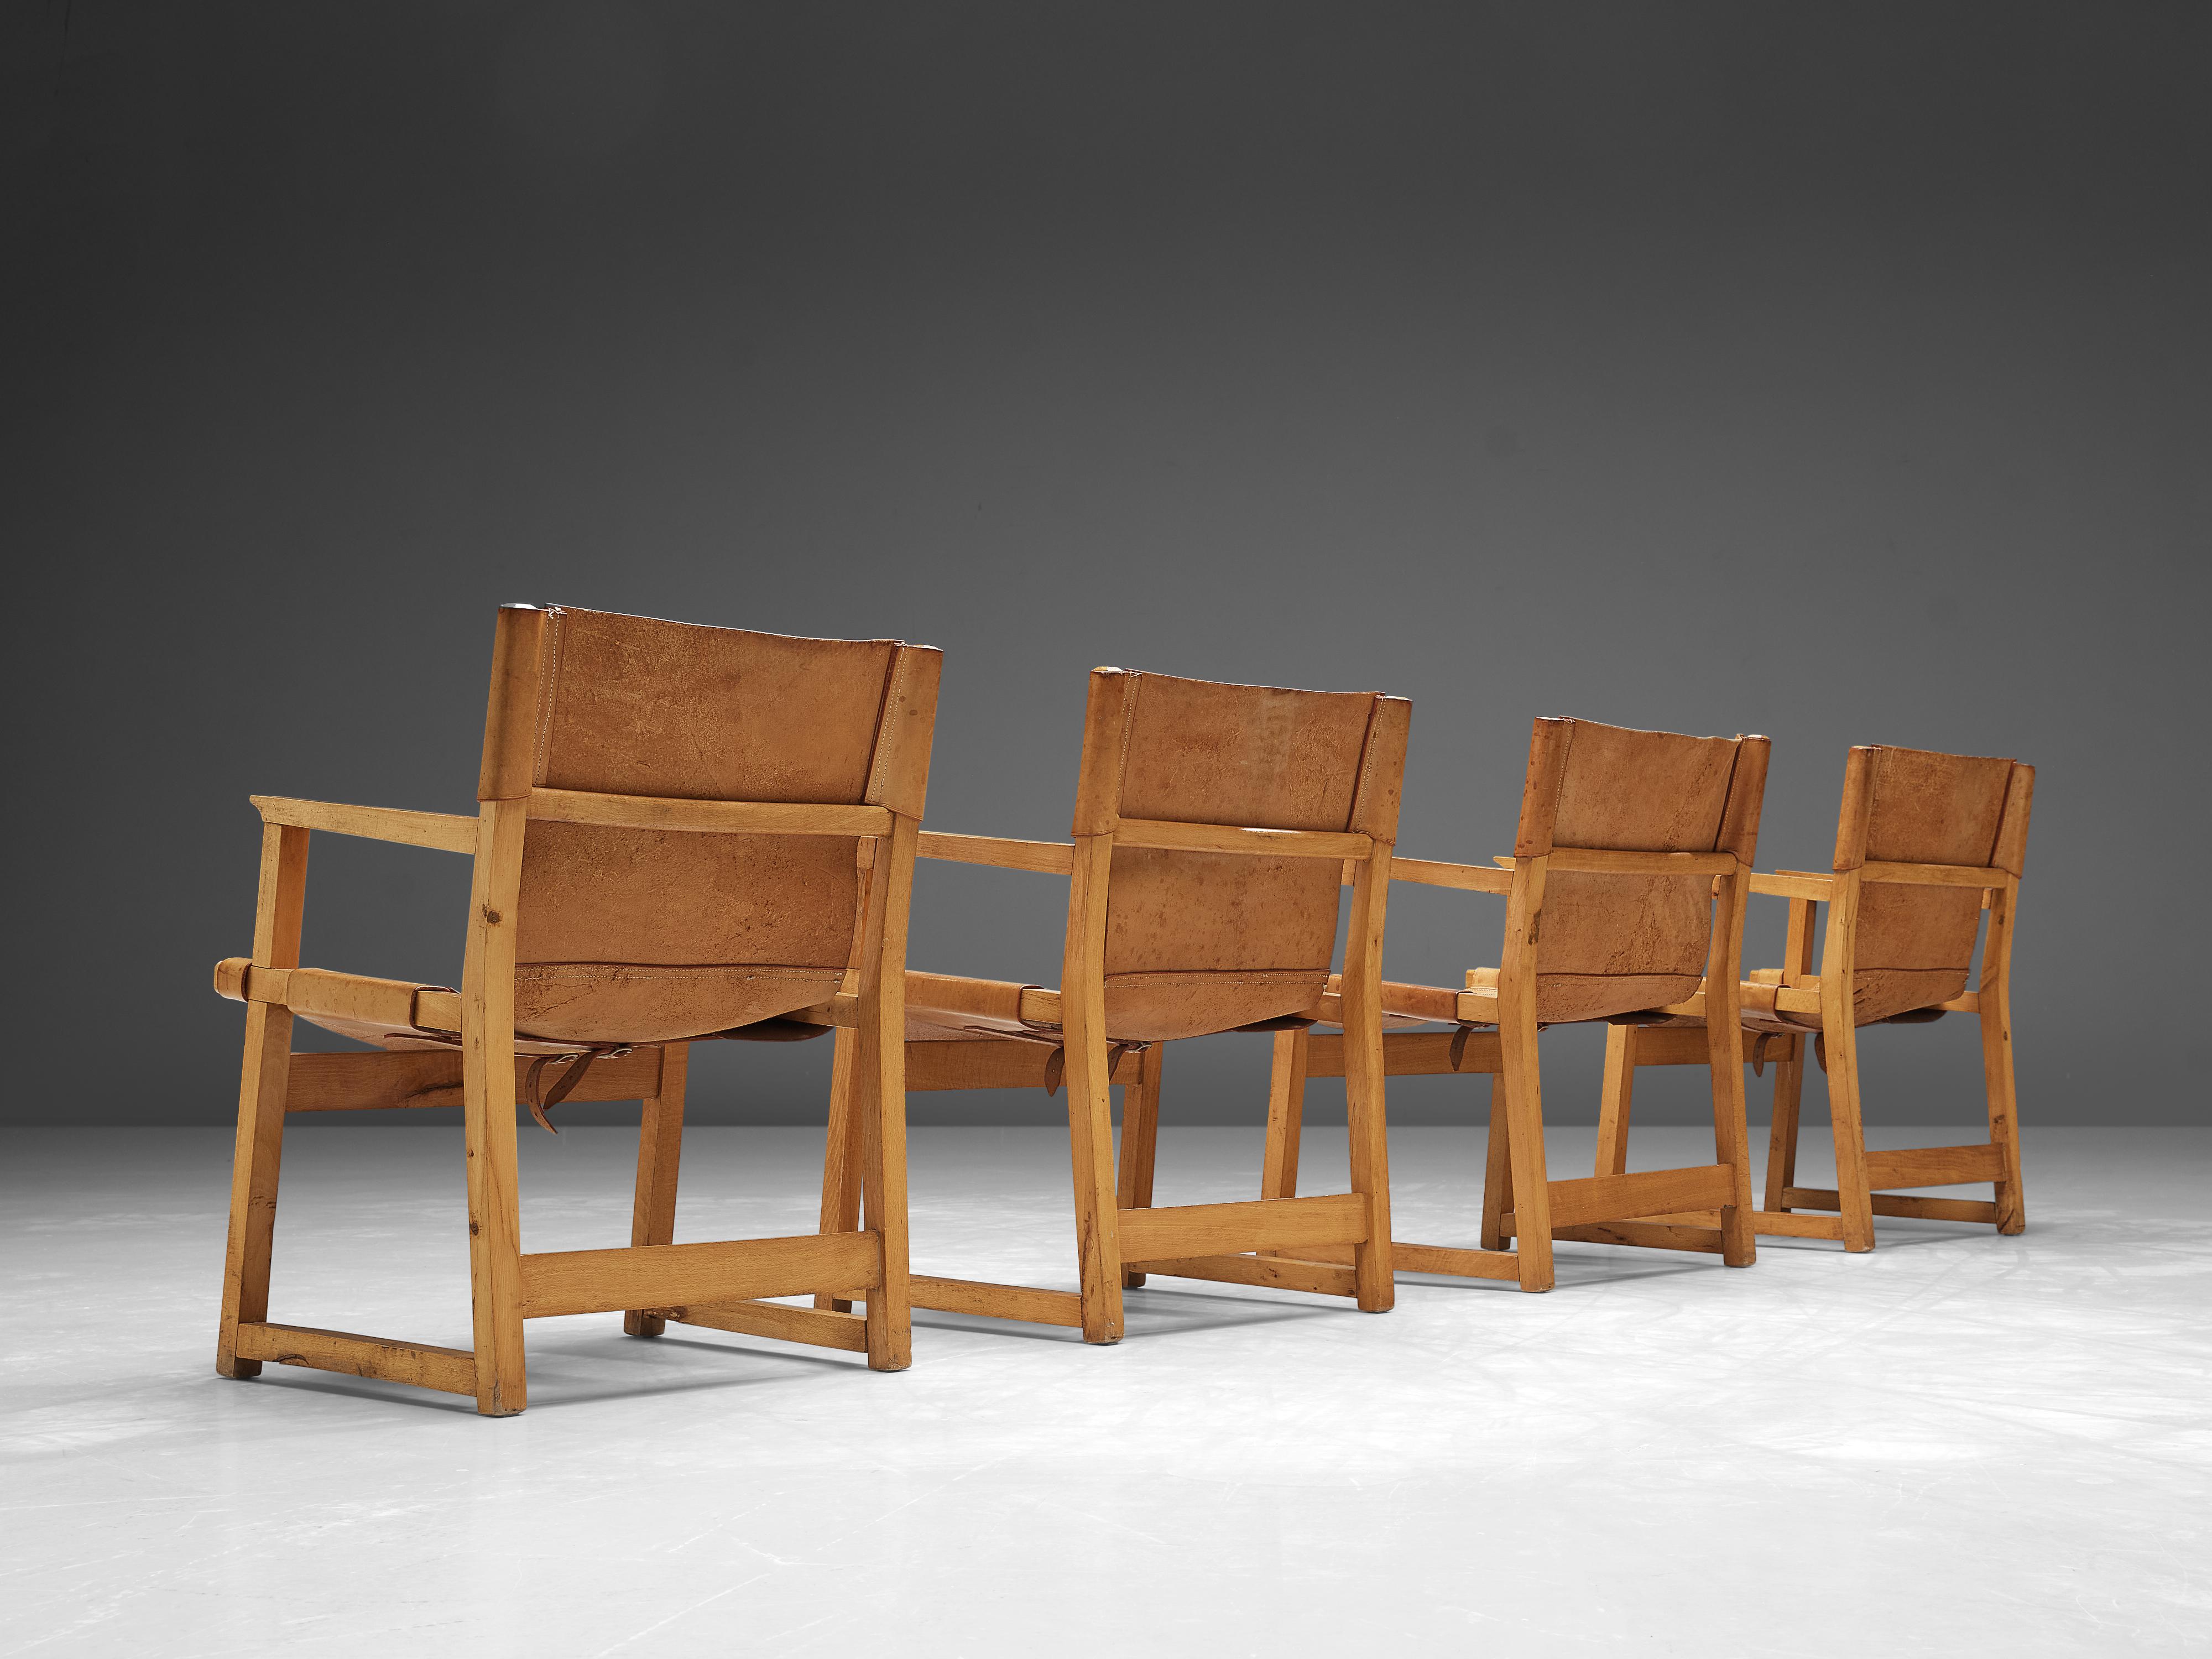 Paco Muñoz, set of four armchairs, leather, beech, Spain, 1950s

Midcentury Safari or ‘Riaza’ armchairs by Spanish designer Paco Muñoz. These chairs are made in of high quality saddle leather with removable buckles underneath the seating. The